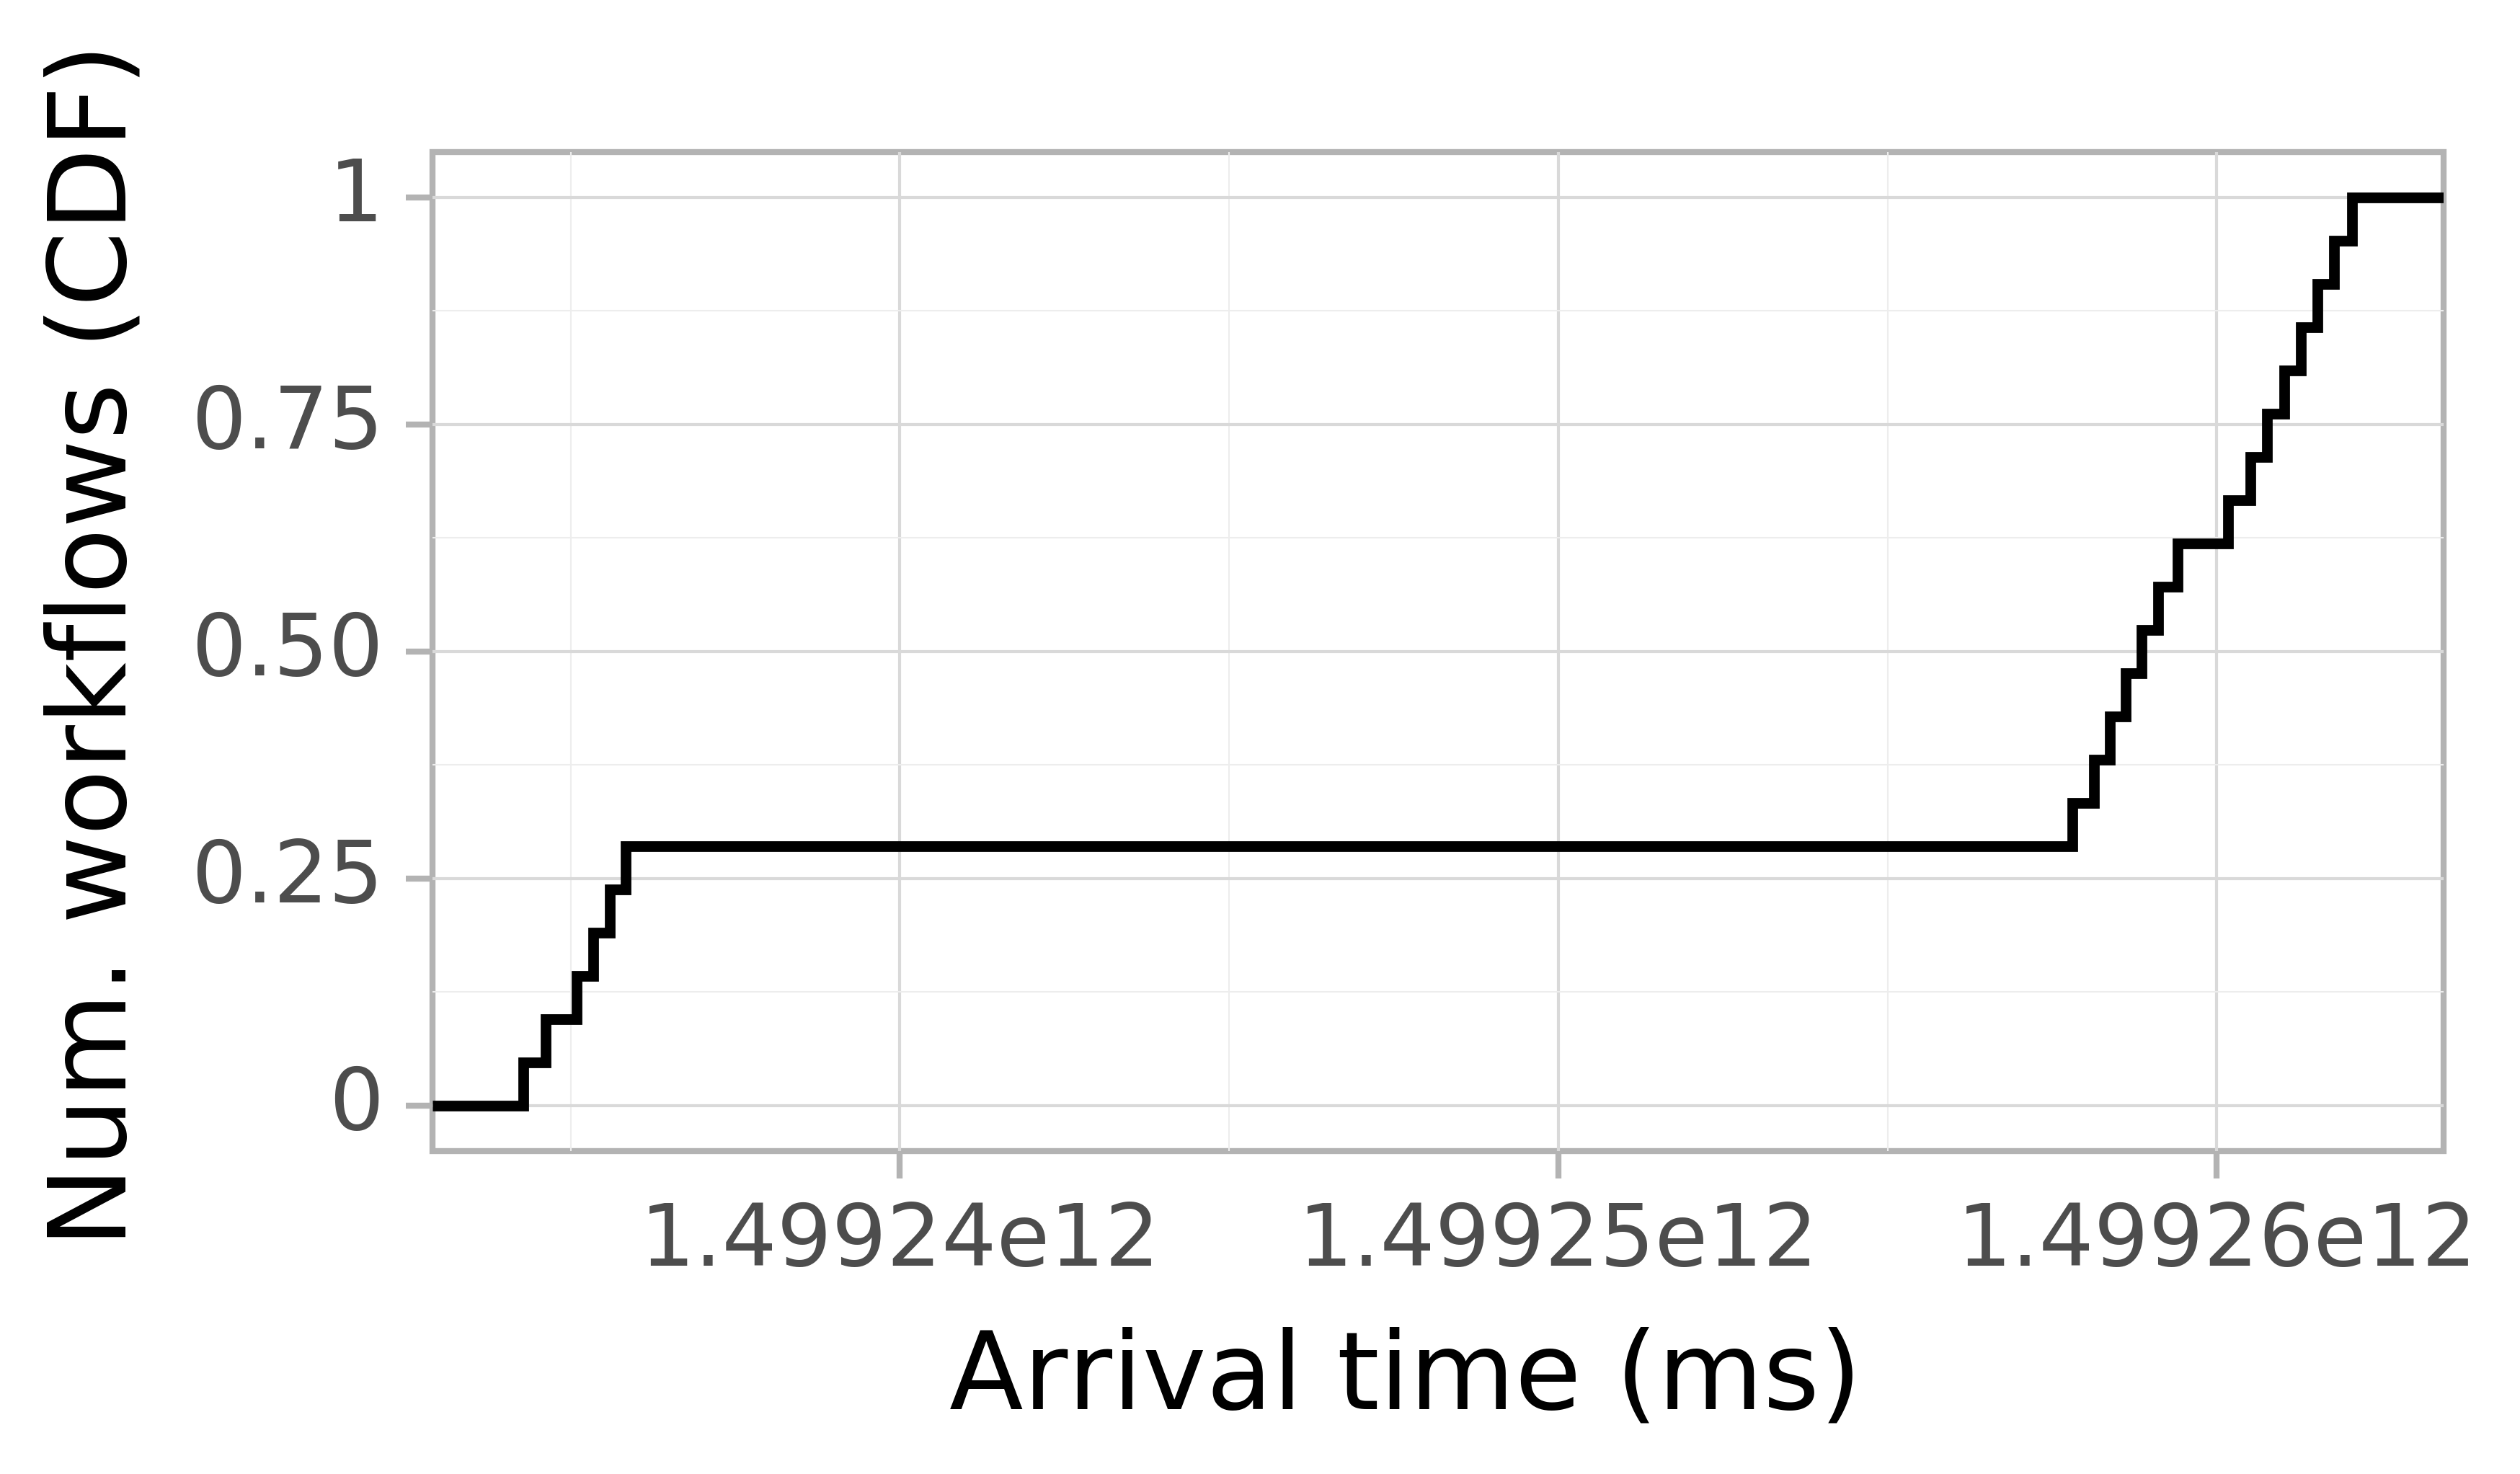 Job arrival CDF graph for the askalon-new_ee36 trace.